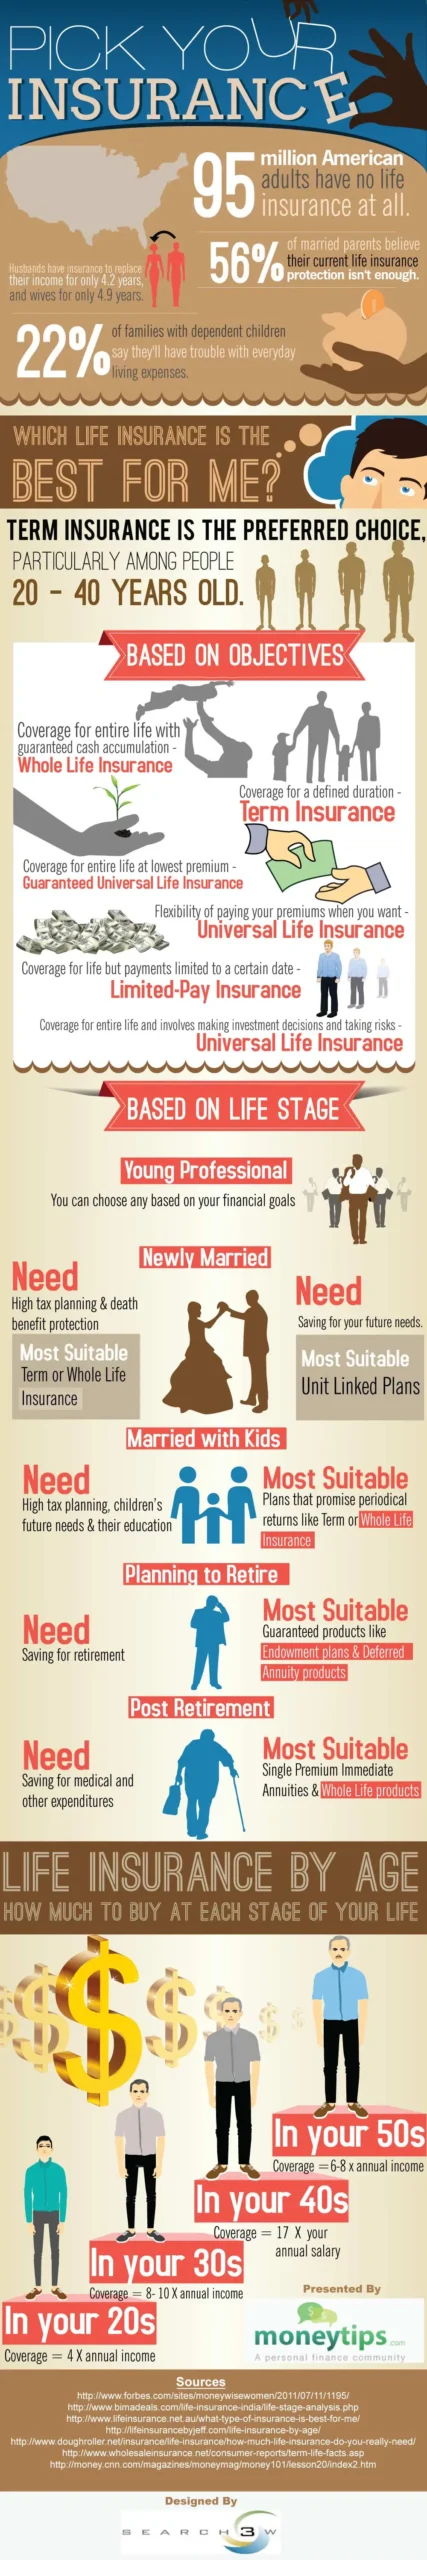 How To Pick The Right Insurance Plan [InfoGraphic]
